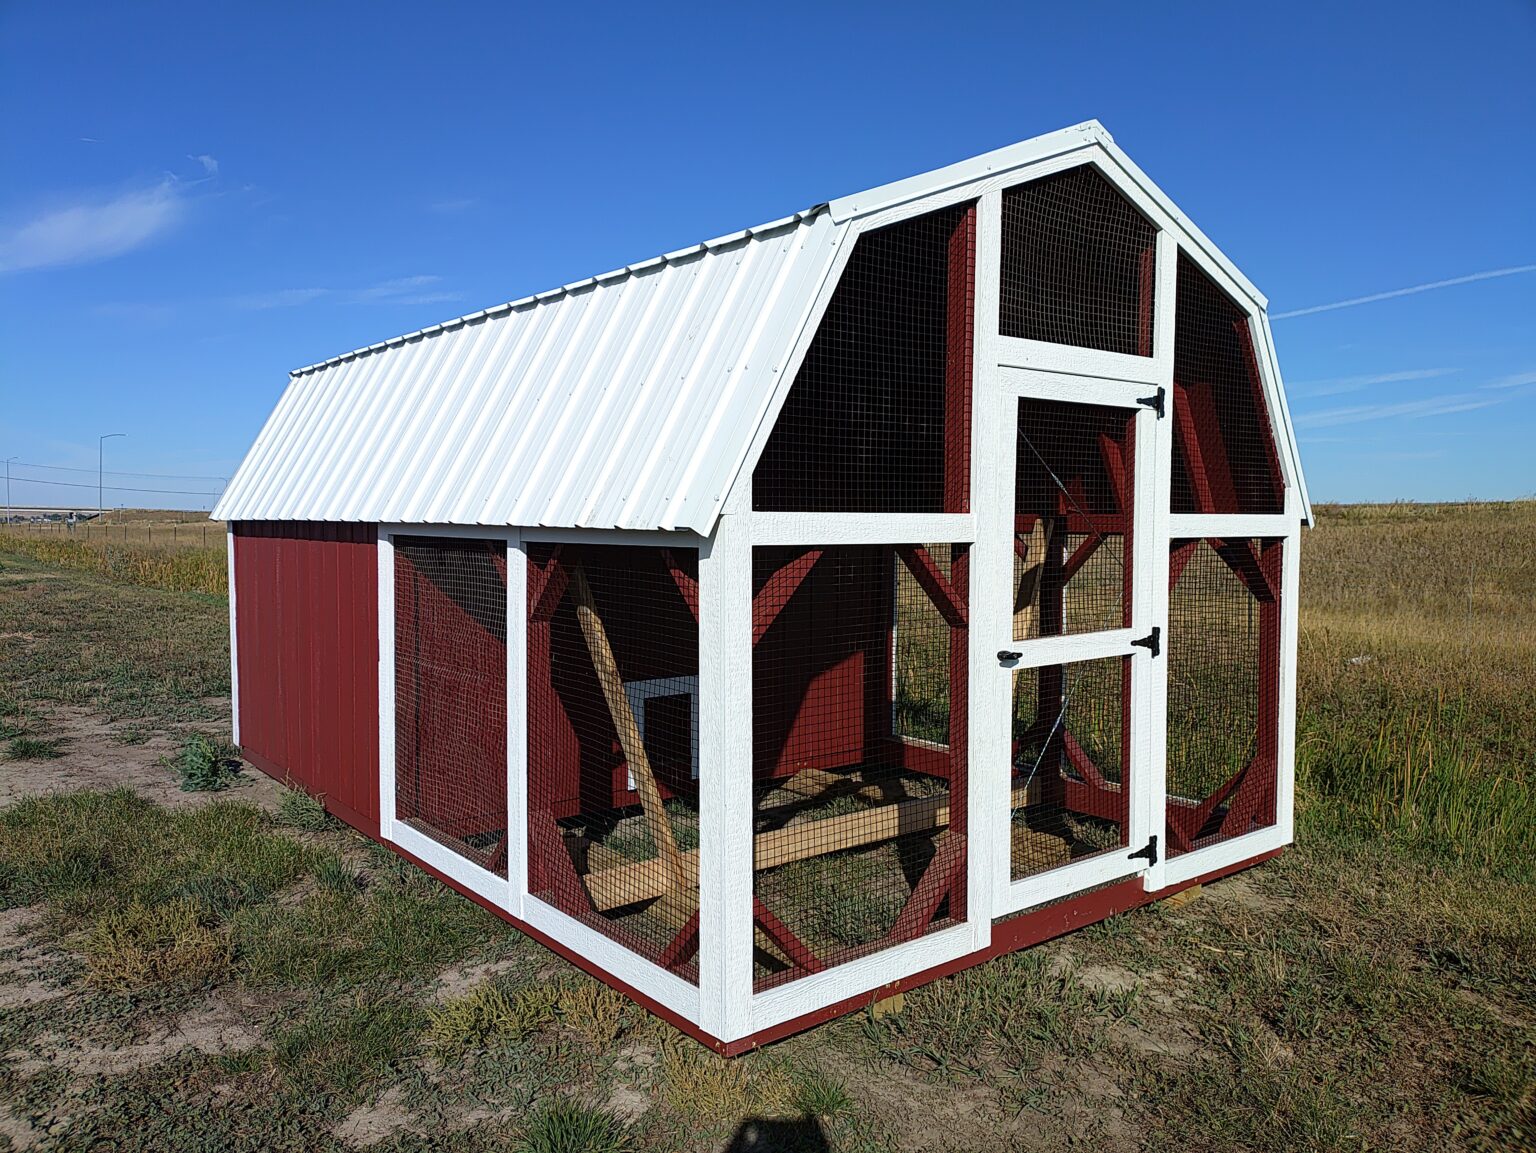 Red and white 10x16 chicken coop with attached run.